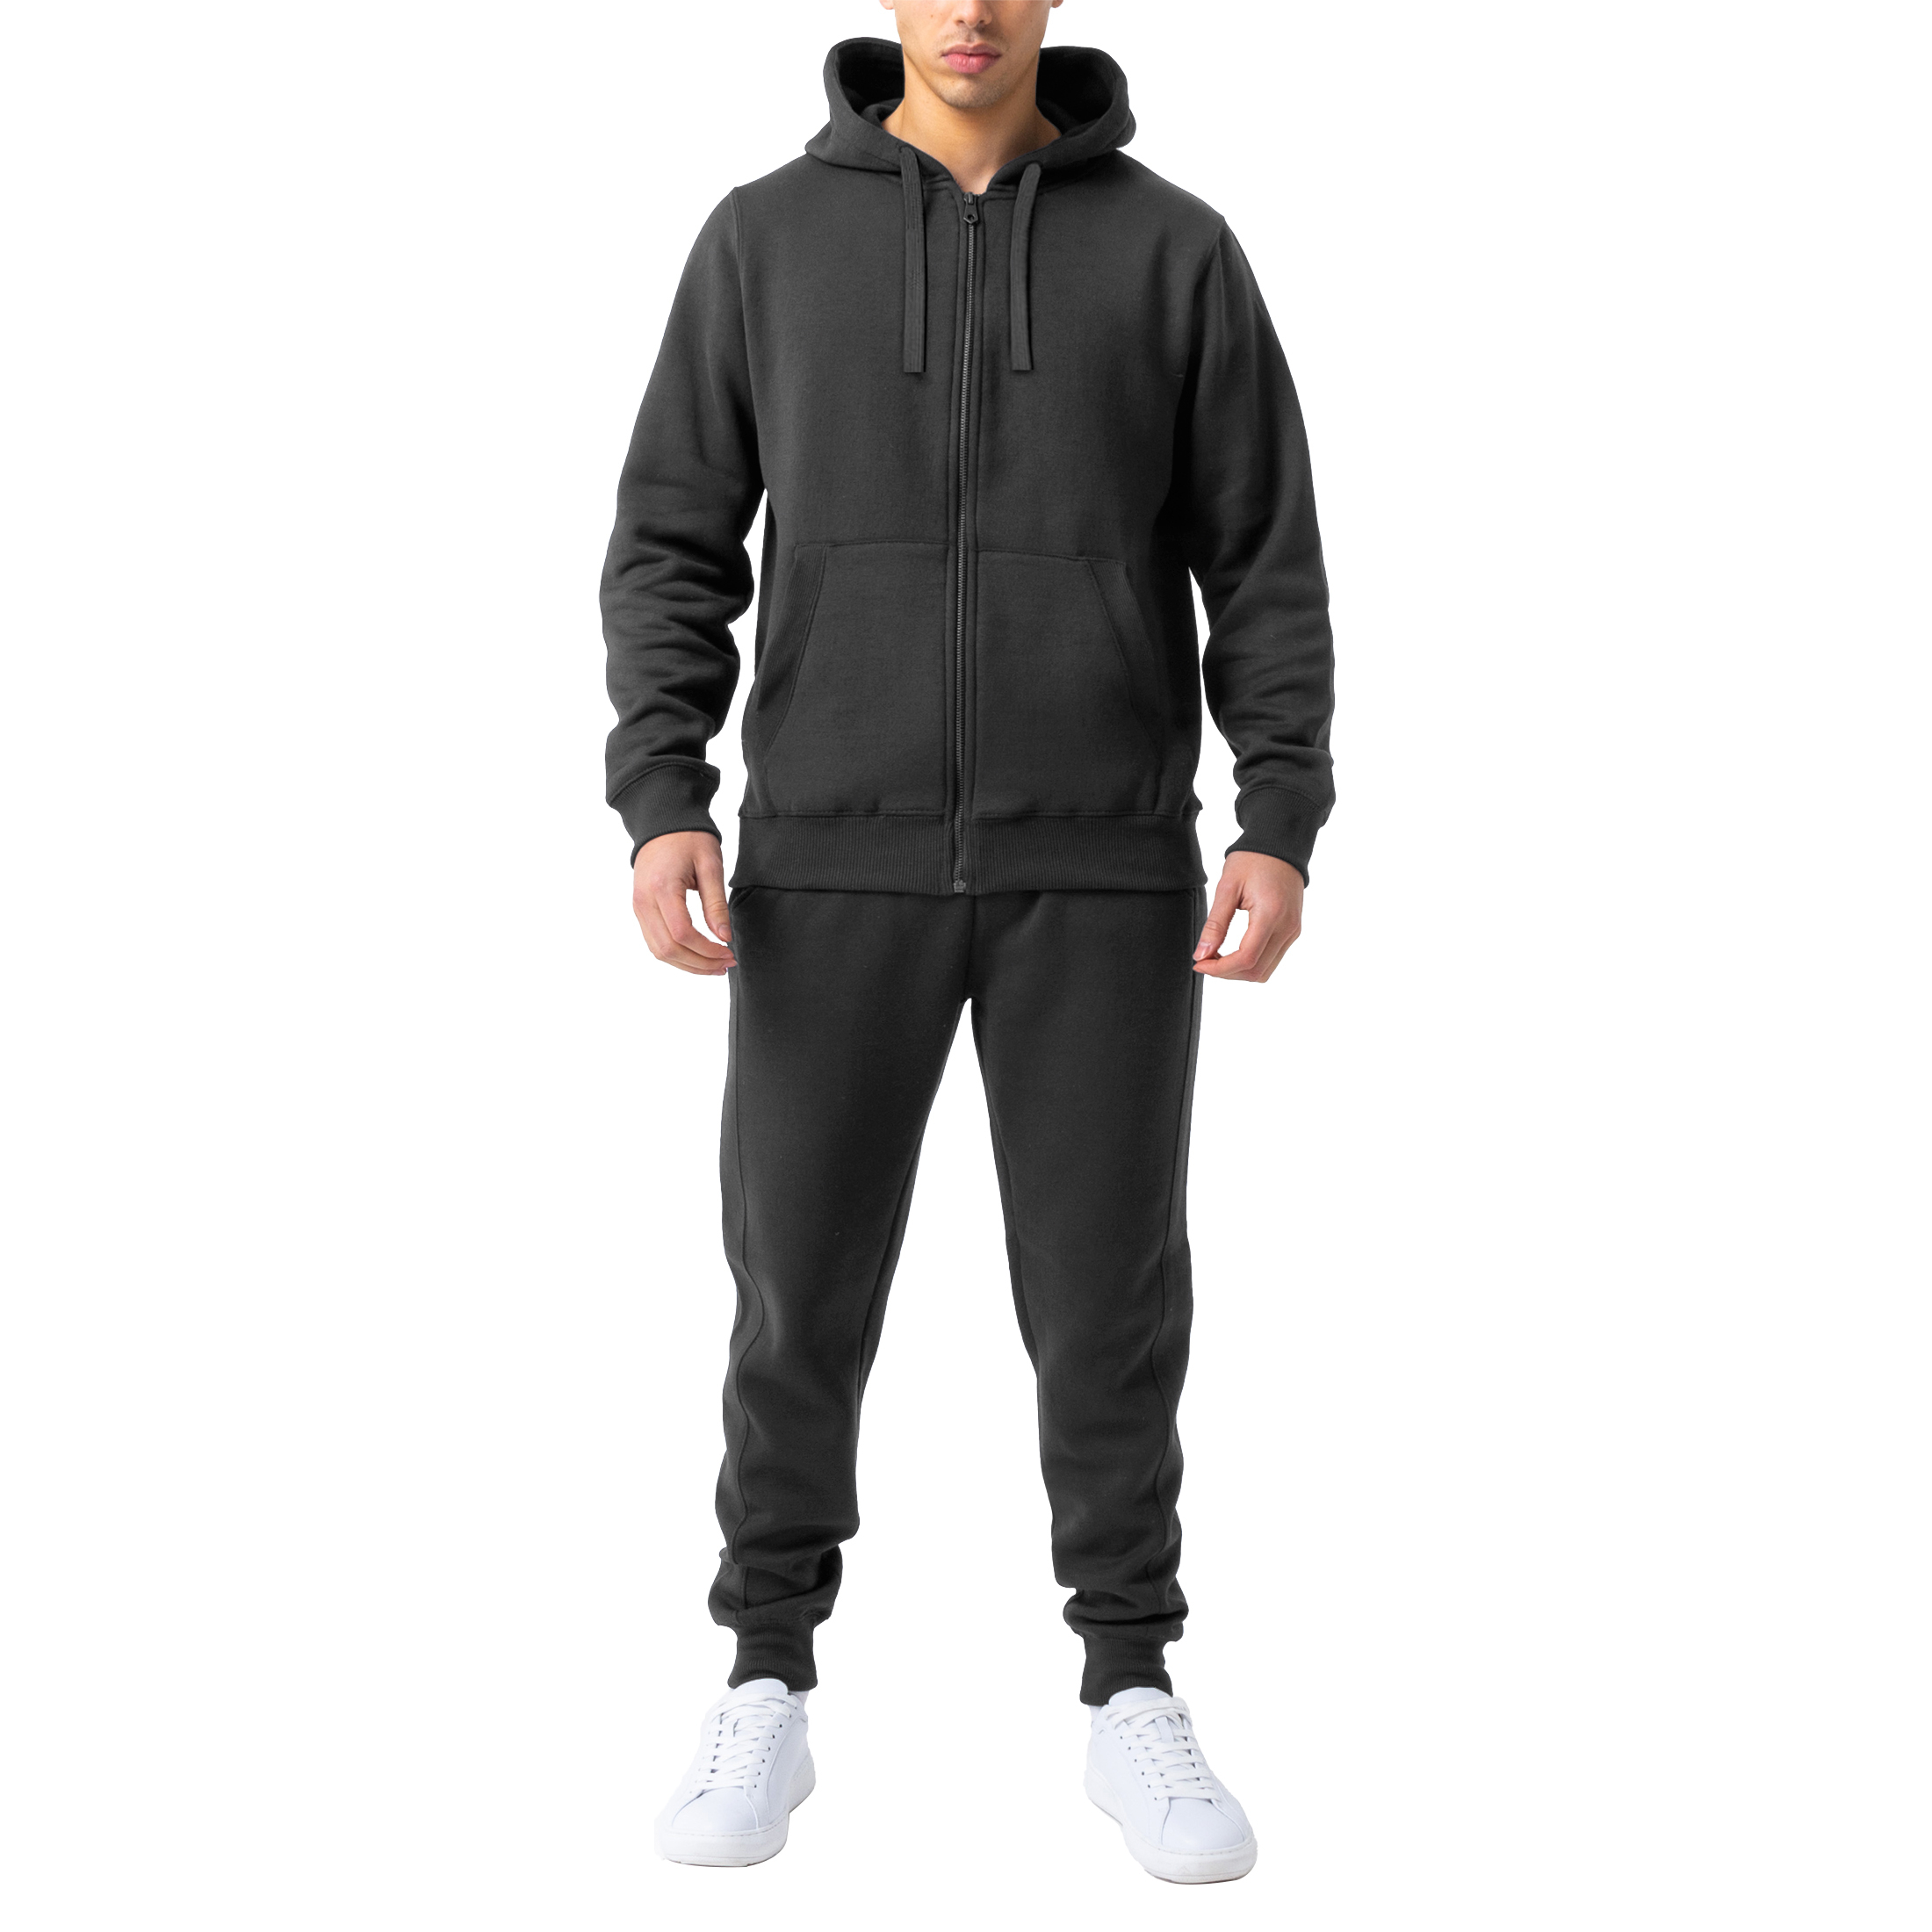 Men's Casual Jogging Athletic Active Full Zip Up Tracksuit - Charcoal, Large